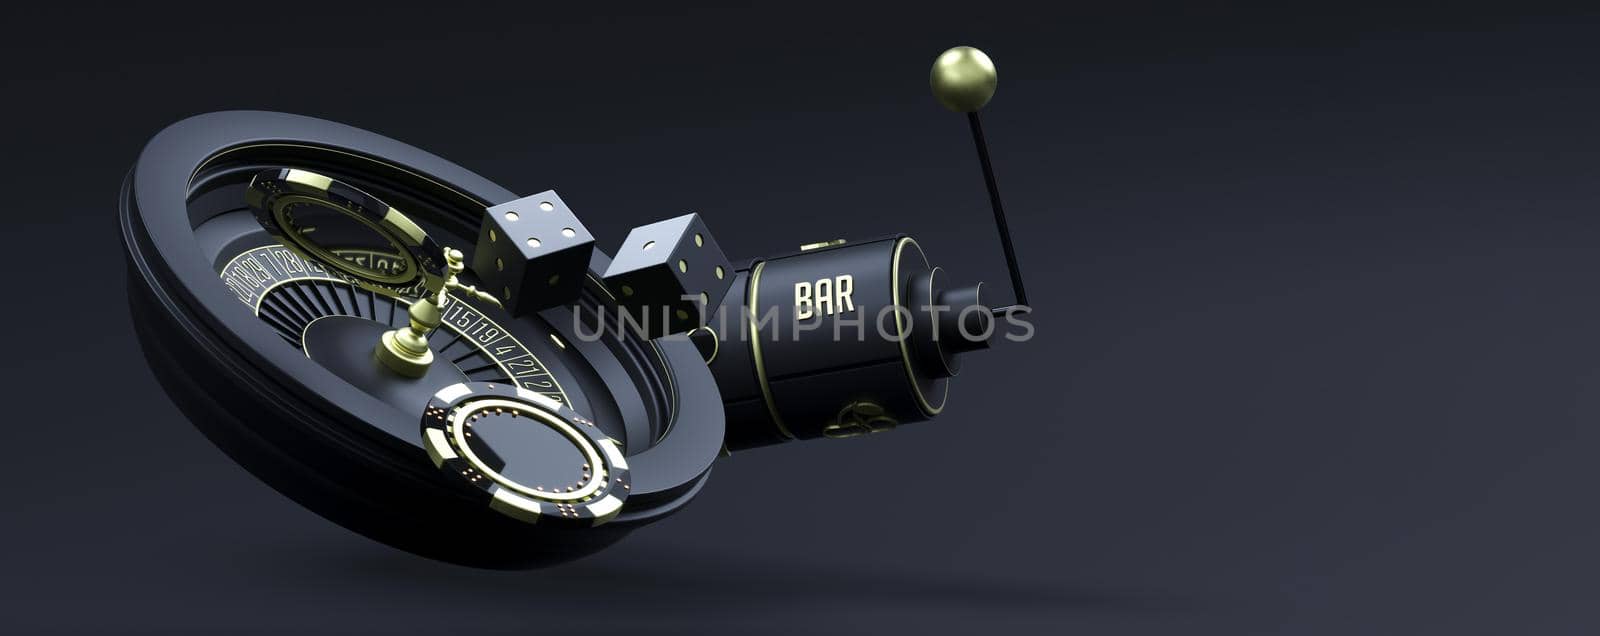 Modern casino background with place for text. Luxury casino roulette wheel on black background with copy space. Online casino theme. Poker game table. 3d rendering